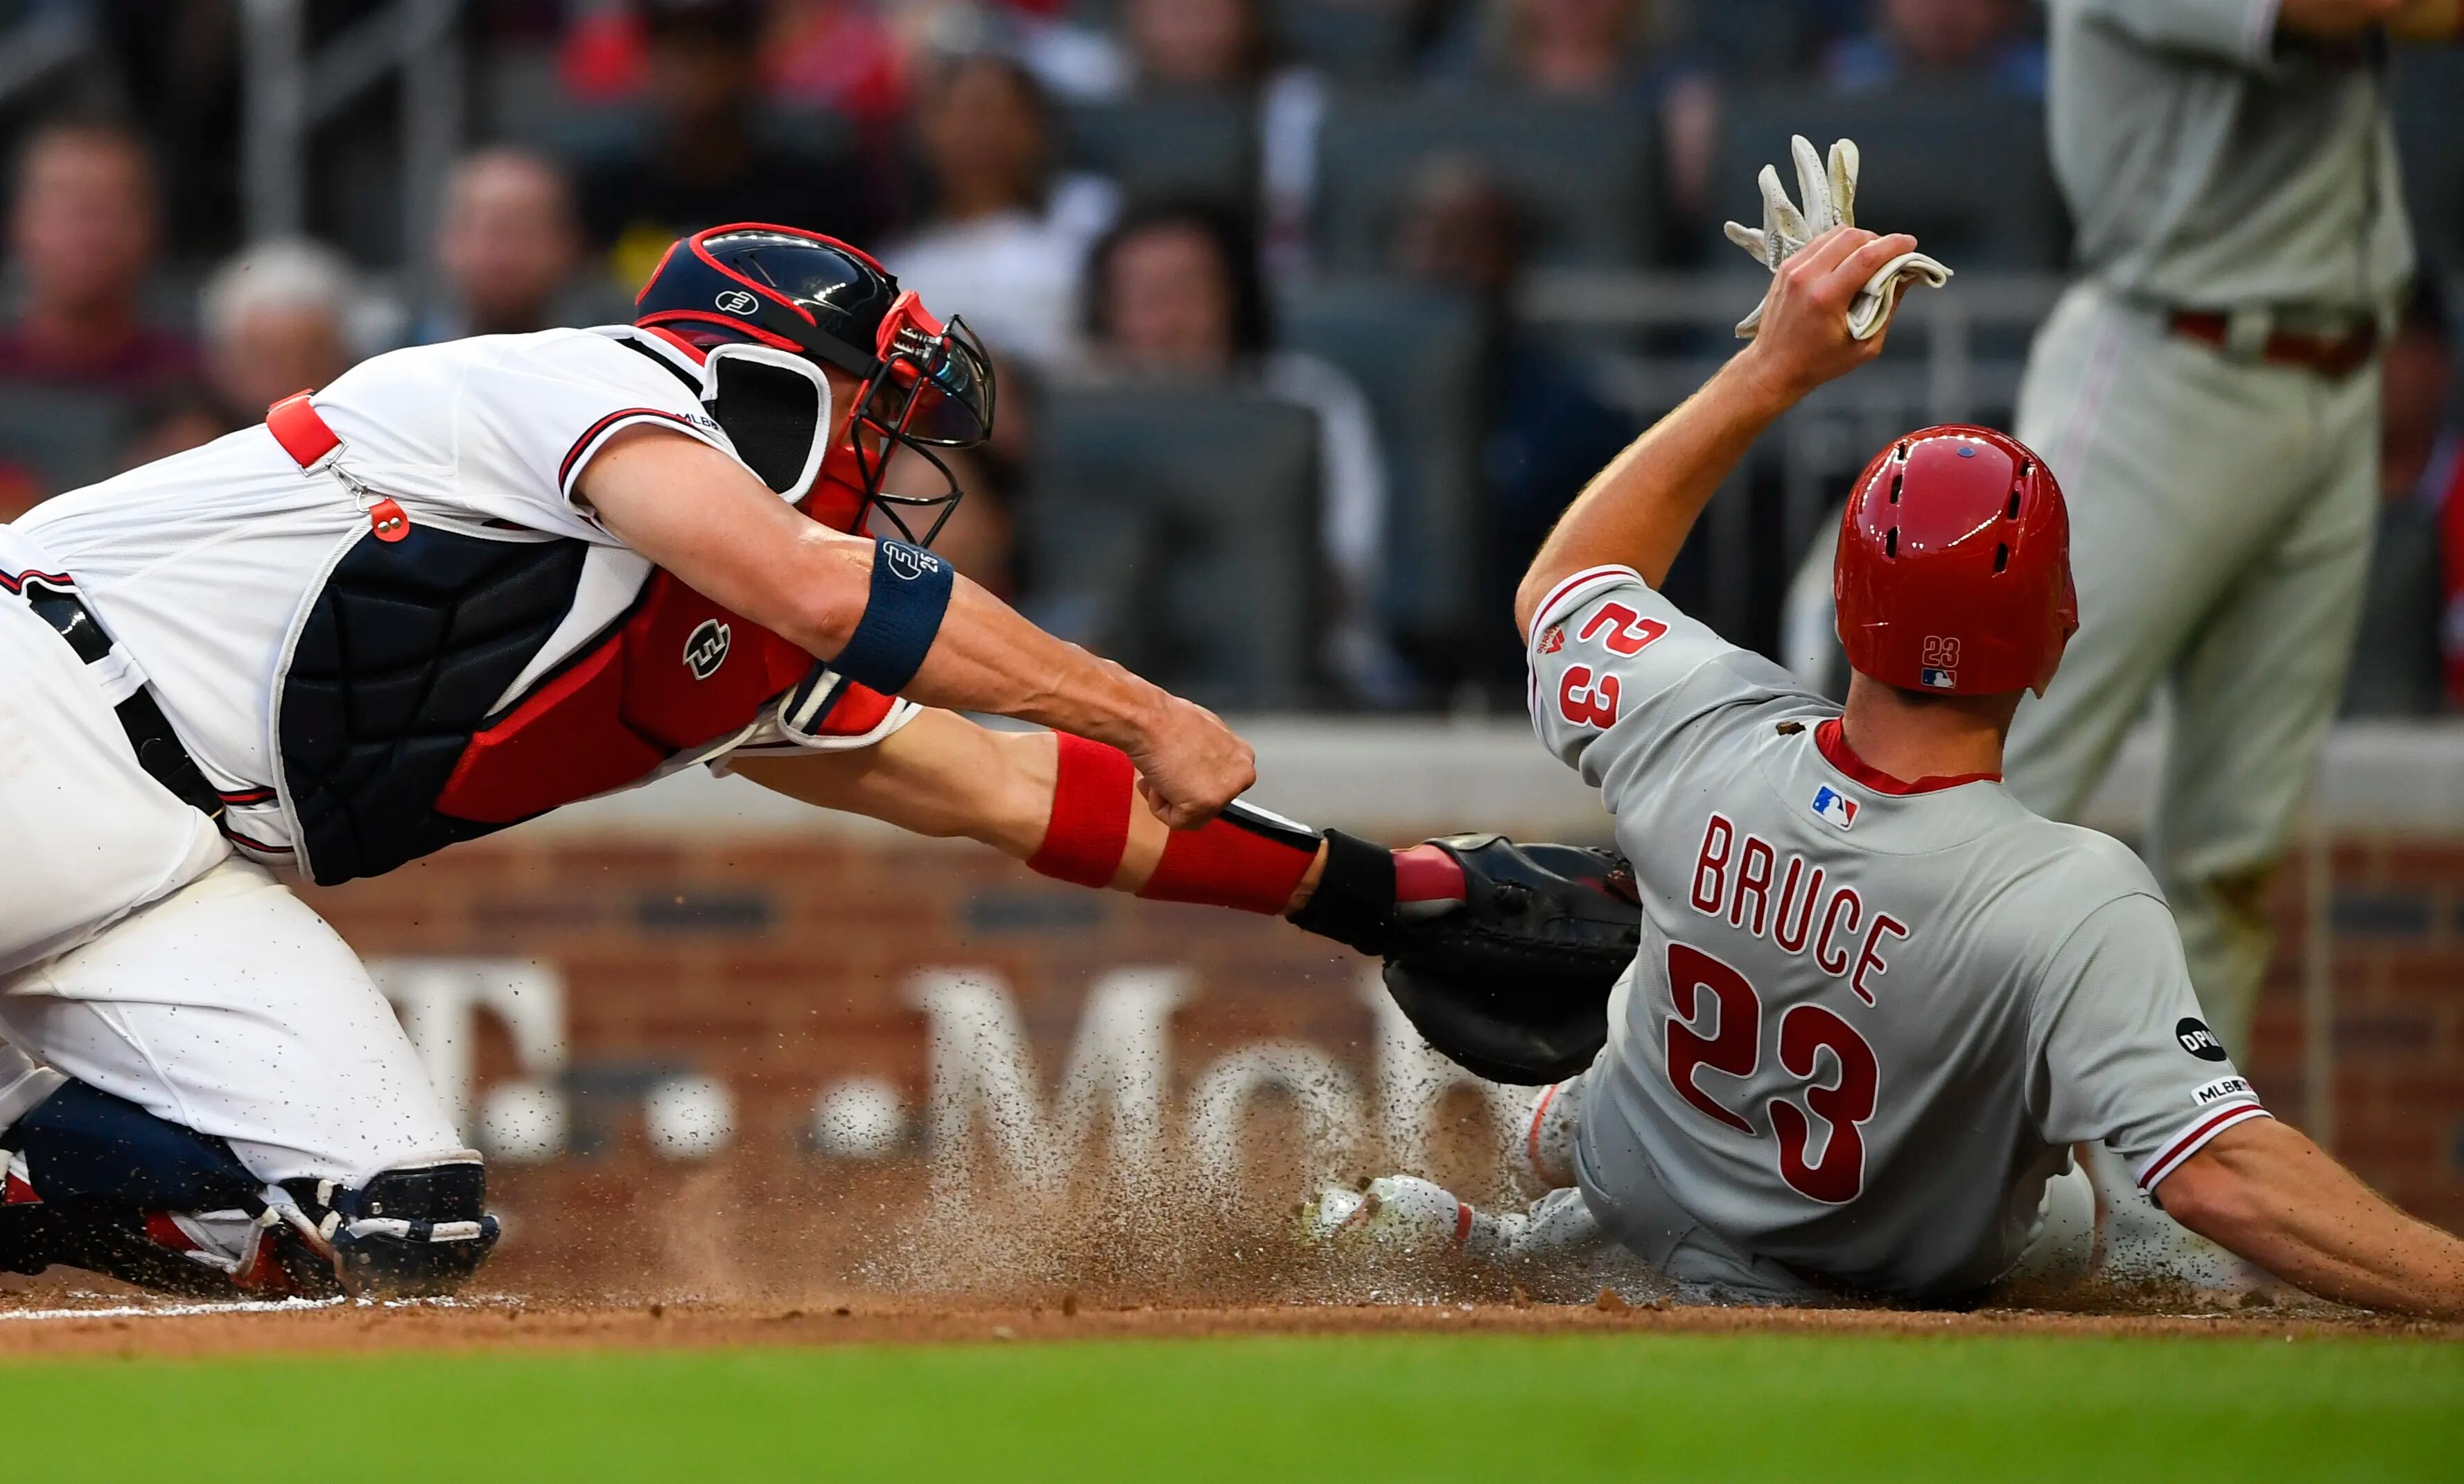 Jay Bruce, J.T. Realmuto both injured, out for series finale against Braves